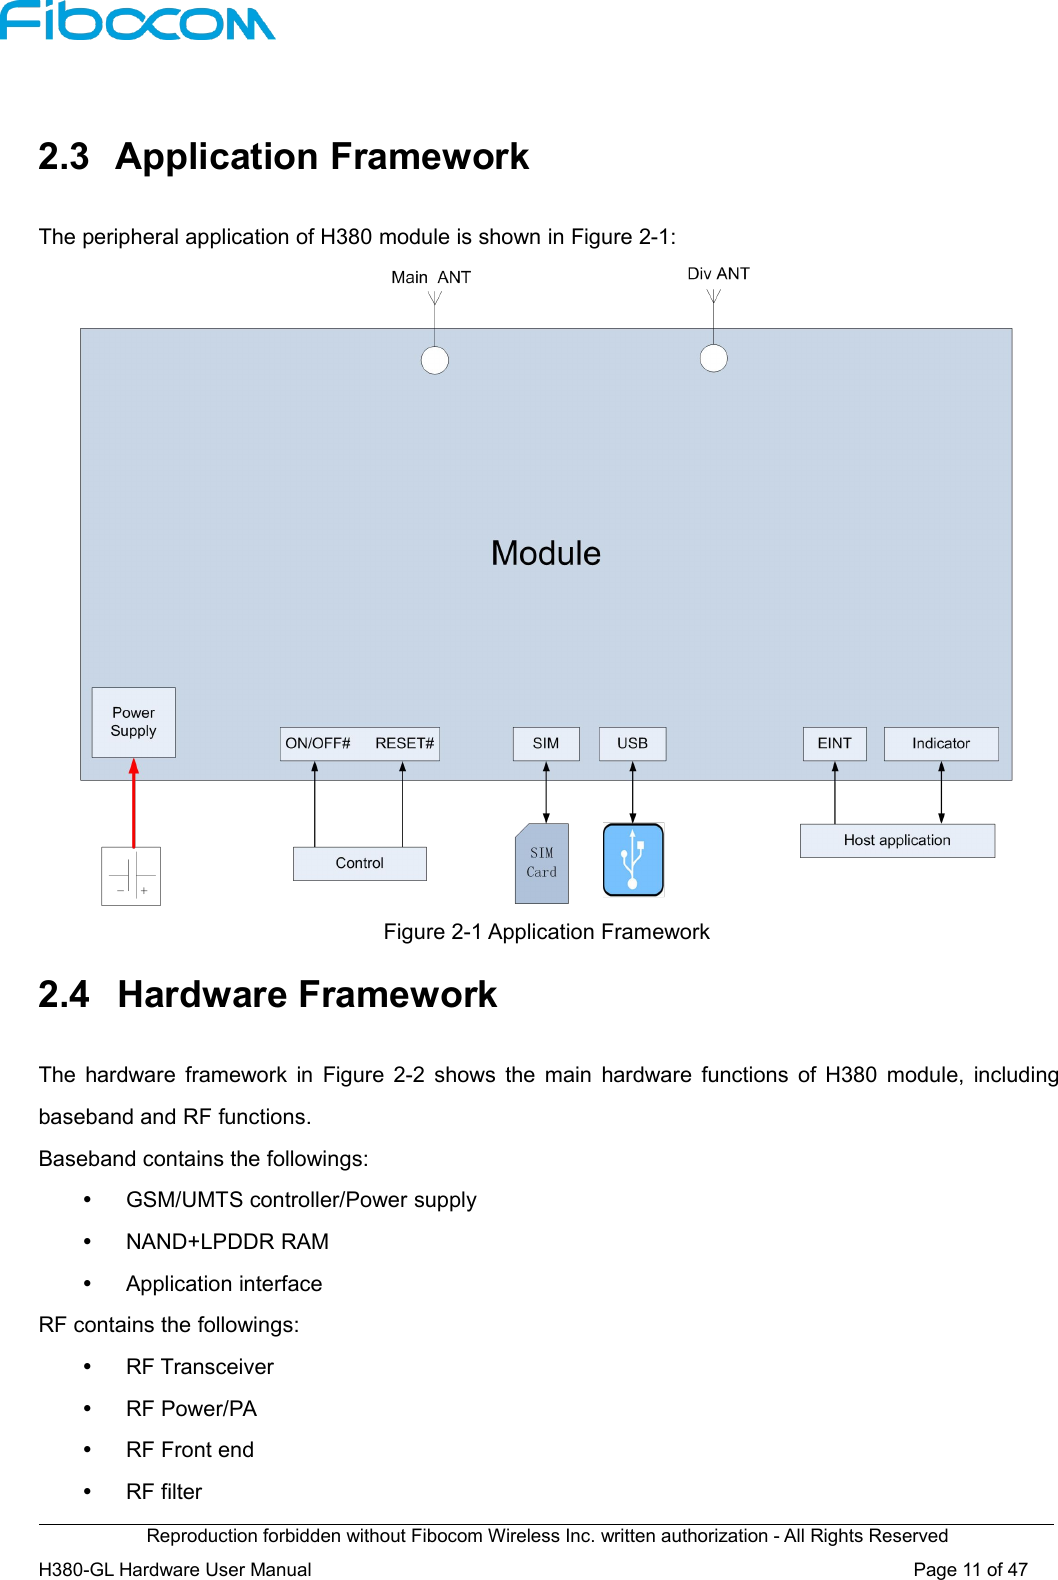 Reproduction forbidden without Fibocom Wireless Inc. written authorization - All Rights ReservedH380-GL Hardware User Manual Page11of472.3 Application FrameworkThe peripheral application of H380 module is shown in Figure 2-1:Figure 2-1 Application Framework2.4 Hardware FrameworkThe hardware framework in Figure 2-2 shows the main hardware functions of H380 module, includingbaseband and RF functions.Baseband contains the followings:GSM/UMTS controller/Power supplyNAND+LPDDR RAMApplication interfaceRF contains the followings:RF TransceiverRF Power/PARF Front endRF filter